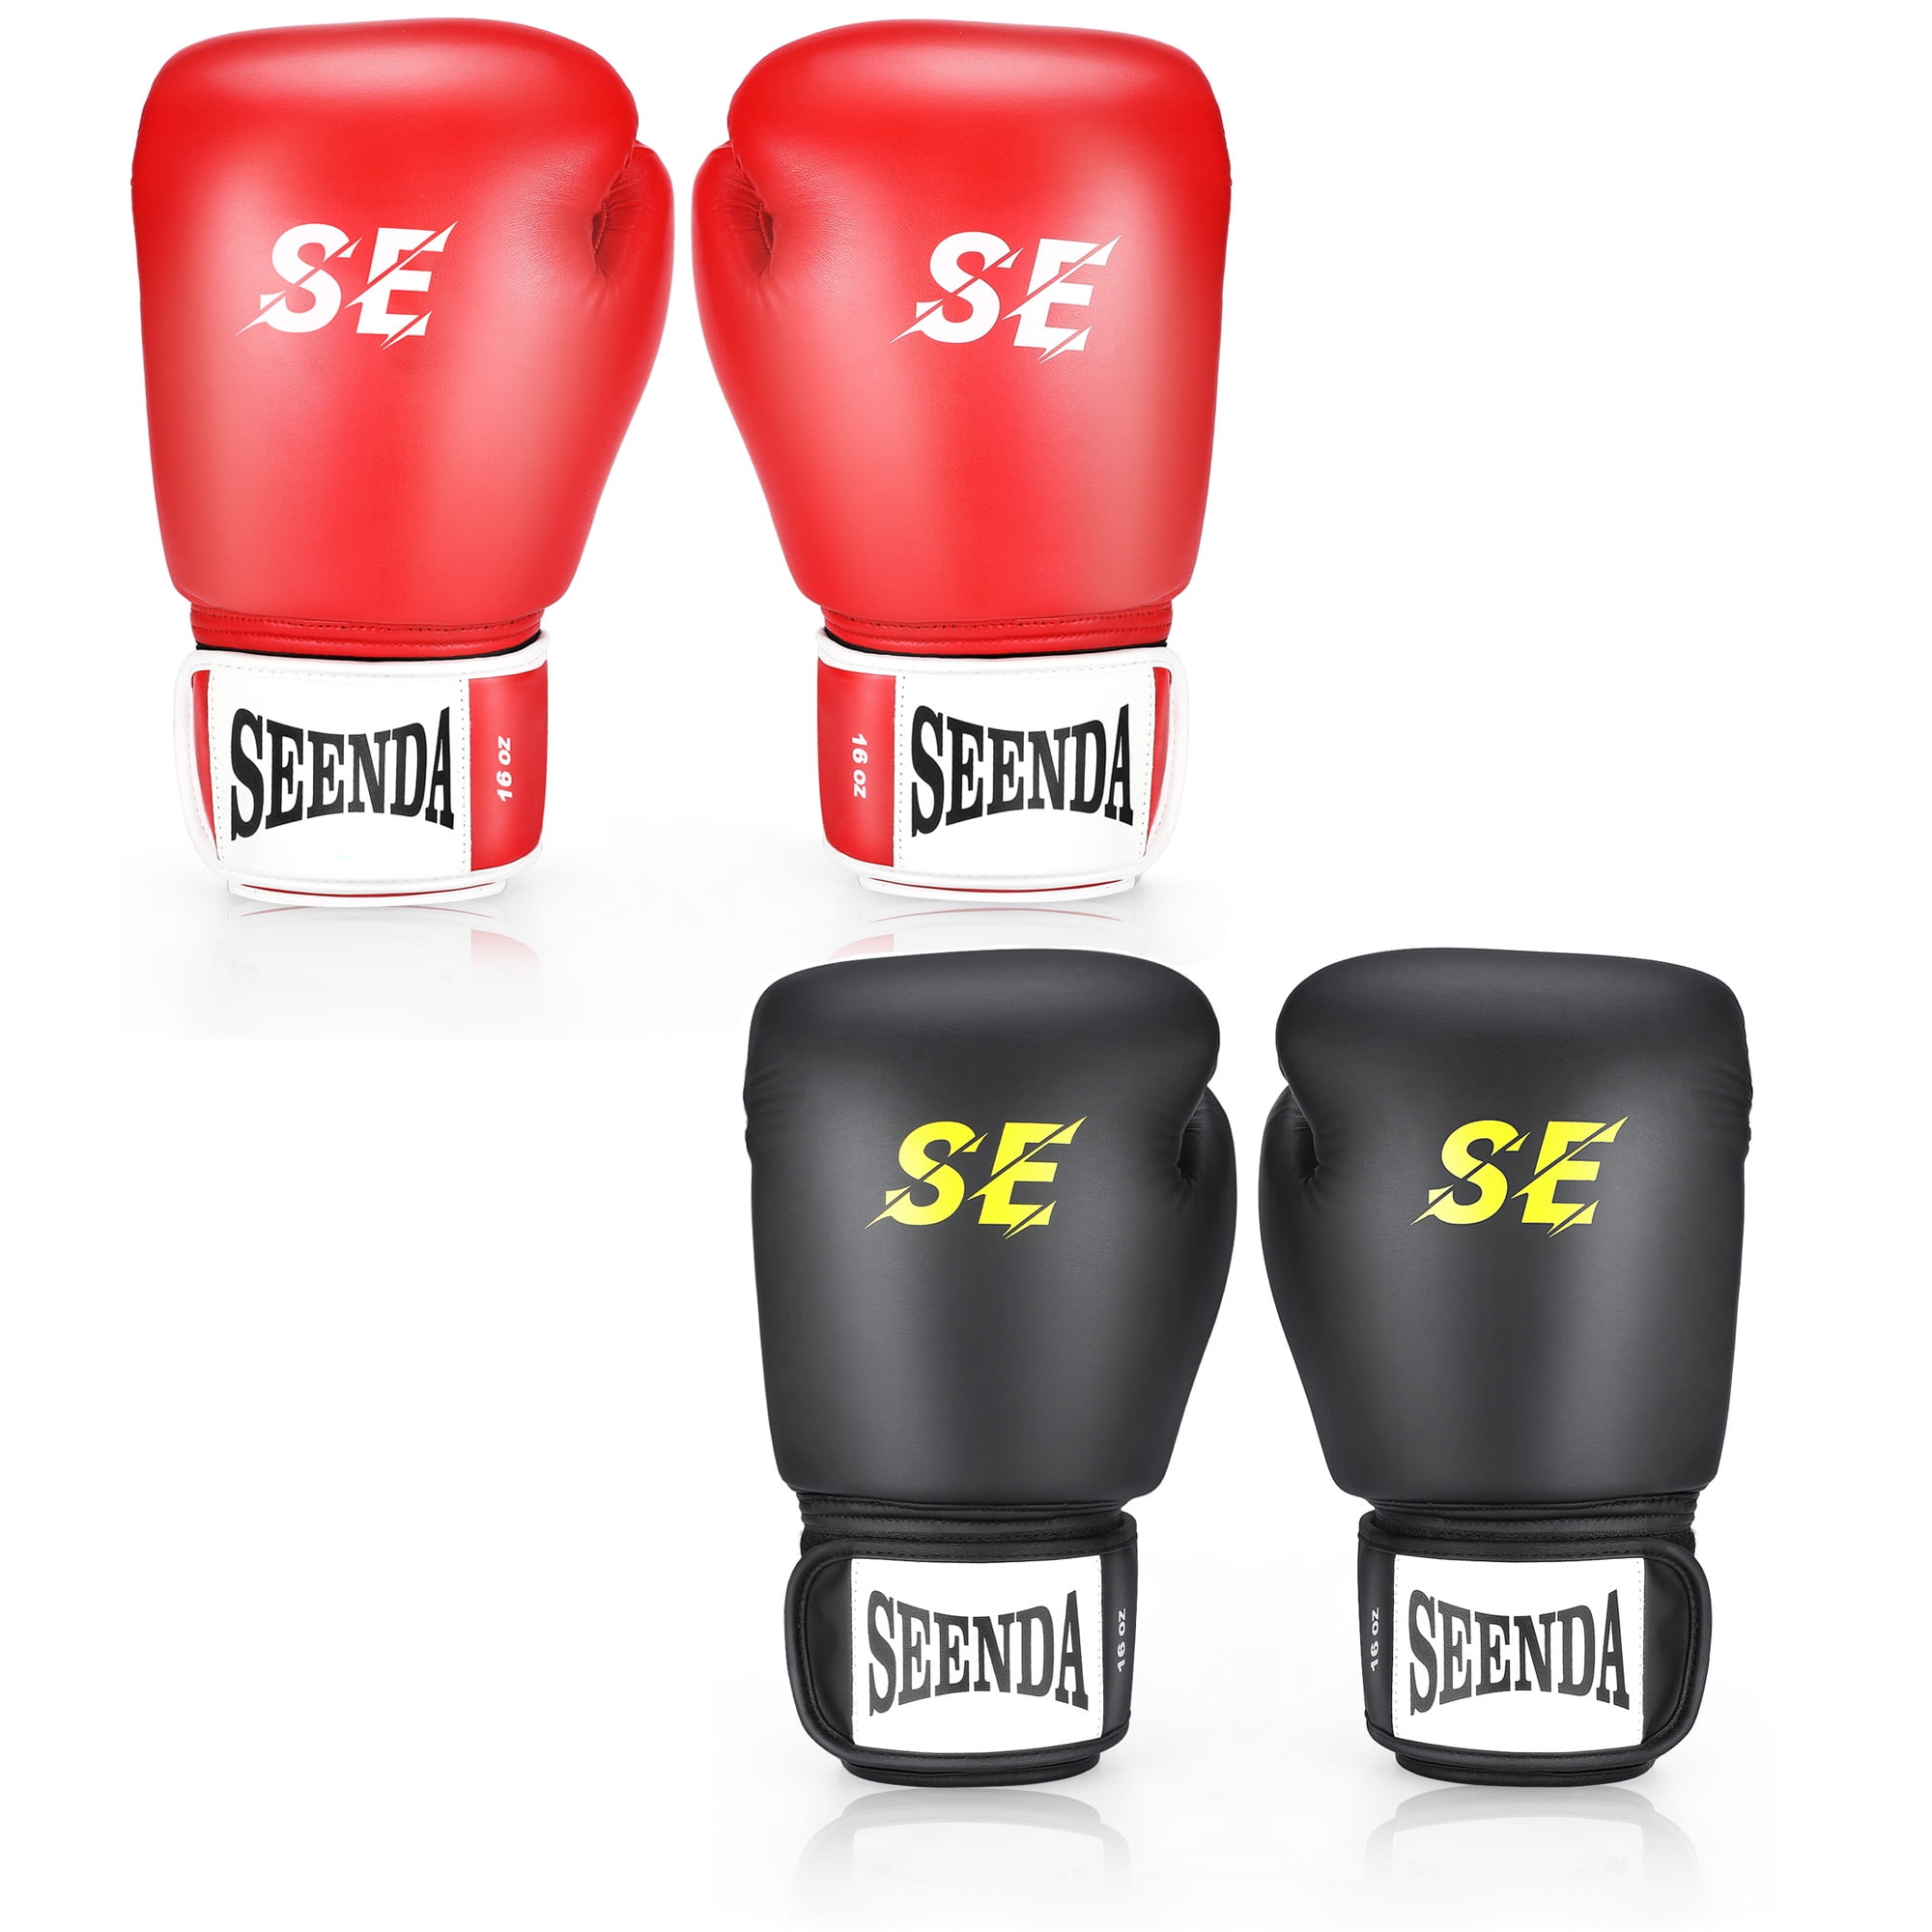 VELO Boxing Gloves Punch Sparring Training Mitts Leather Muay Thai Fight Wraps 